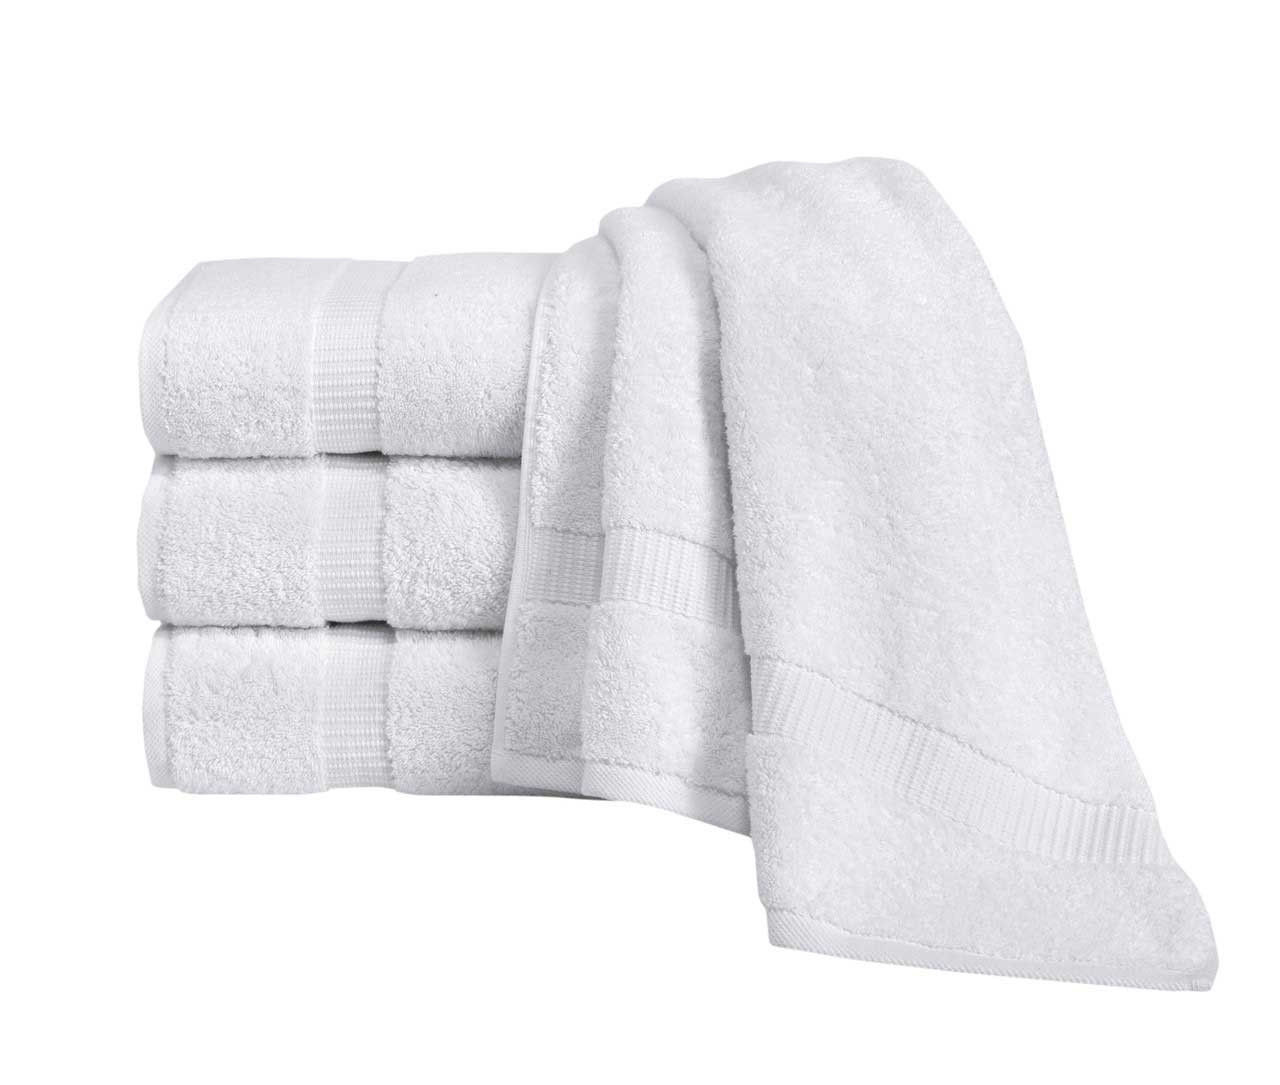 How do royal Turkish towels from the Villa Collection differ from regular towels?